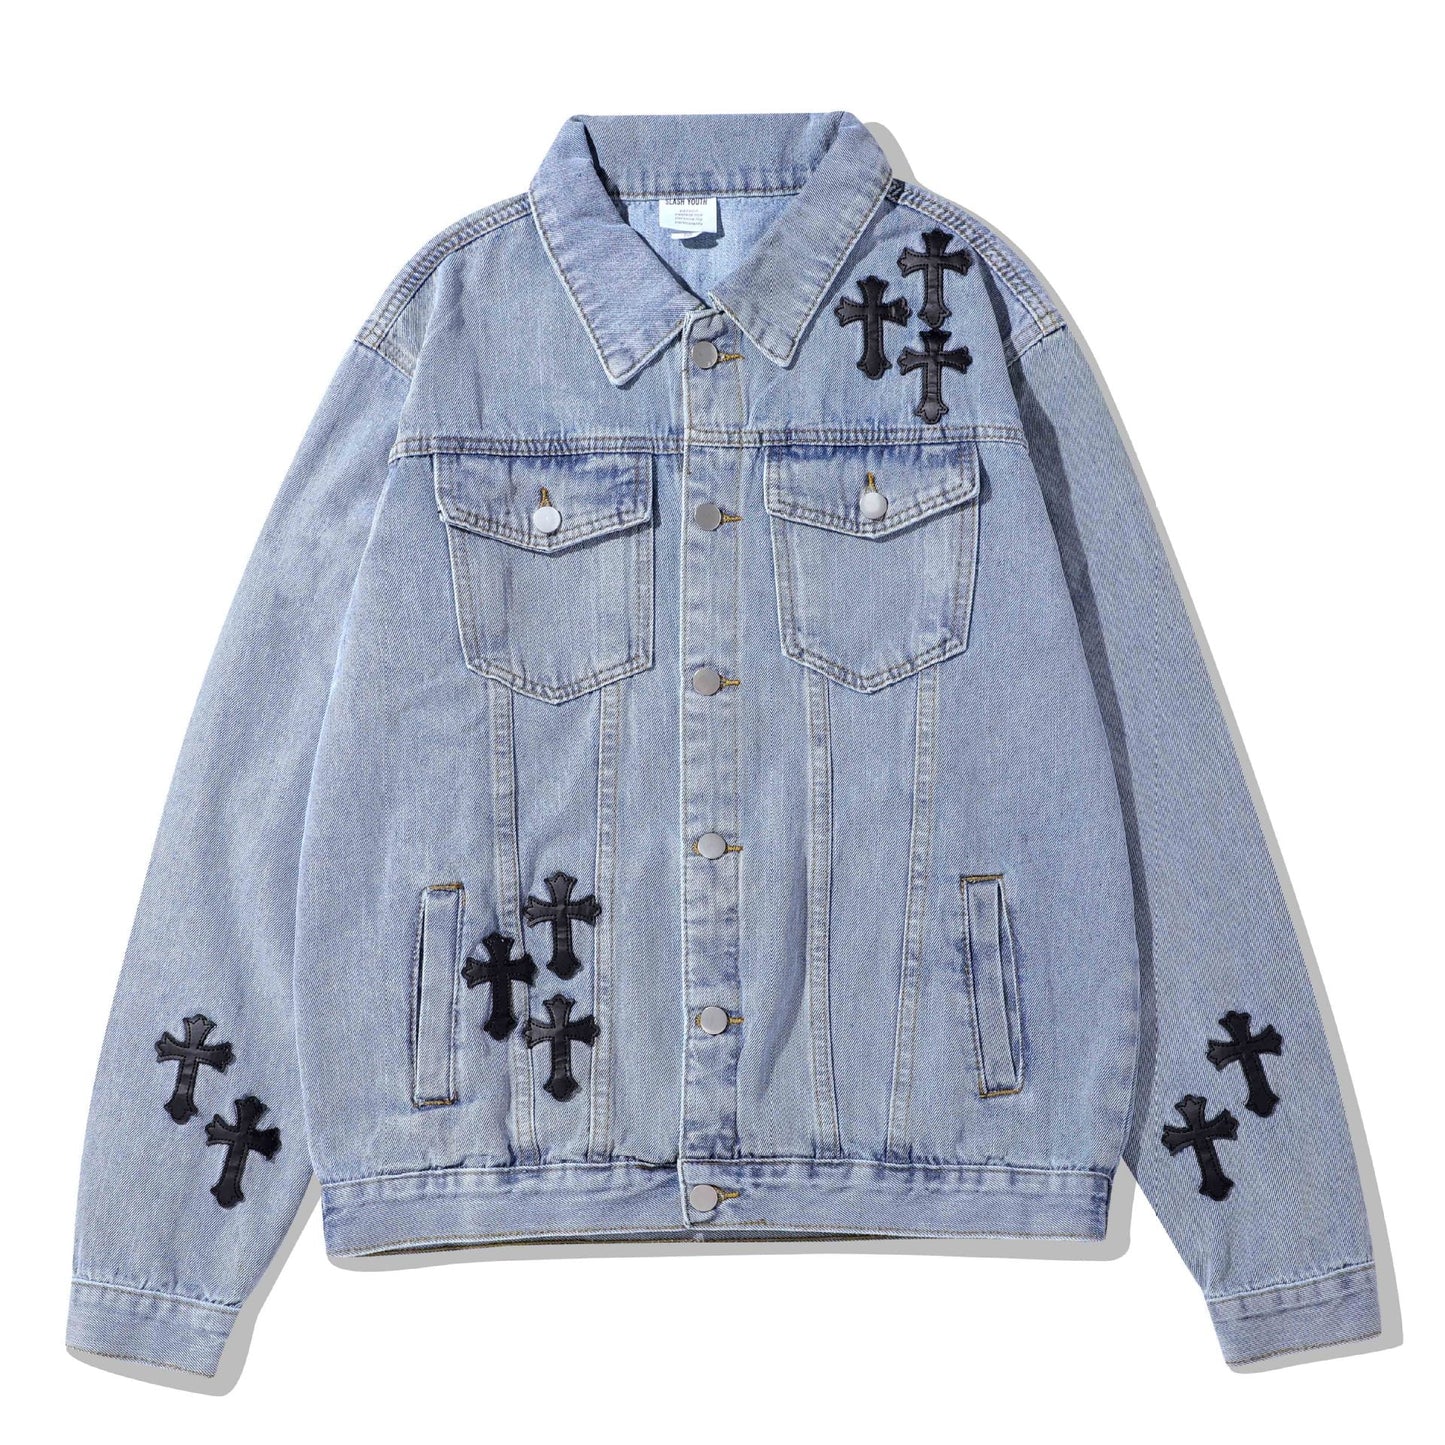 High Street Leather Embroidery Cross Old Denim Jacket Blue s112 Xl